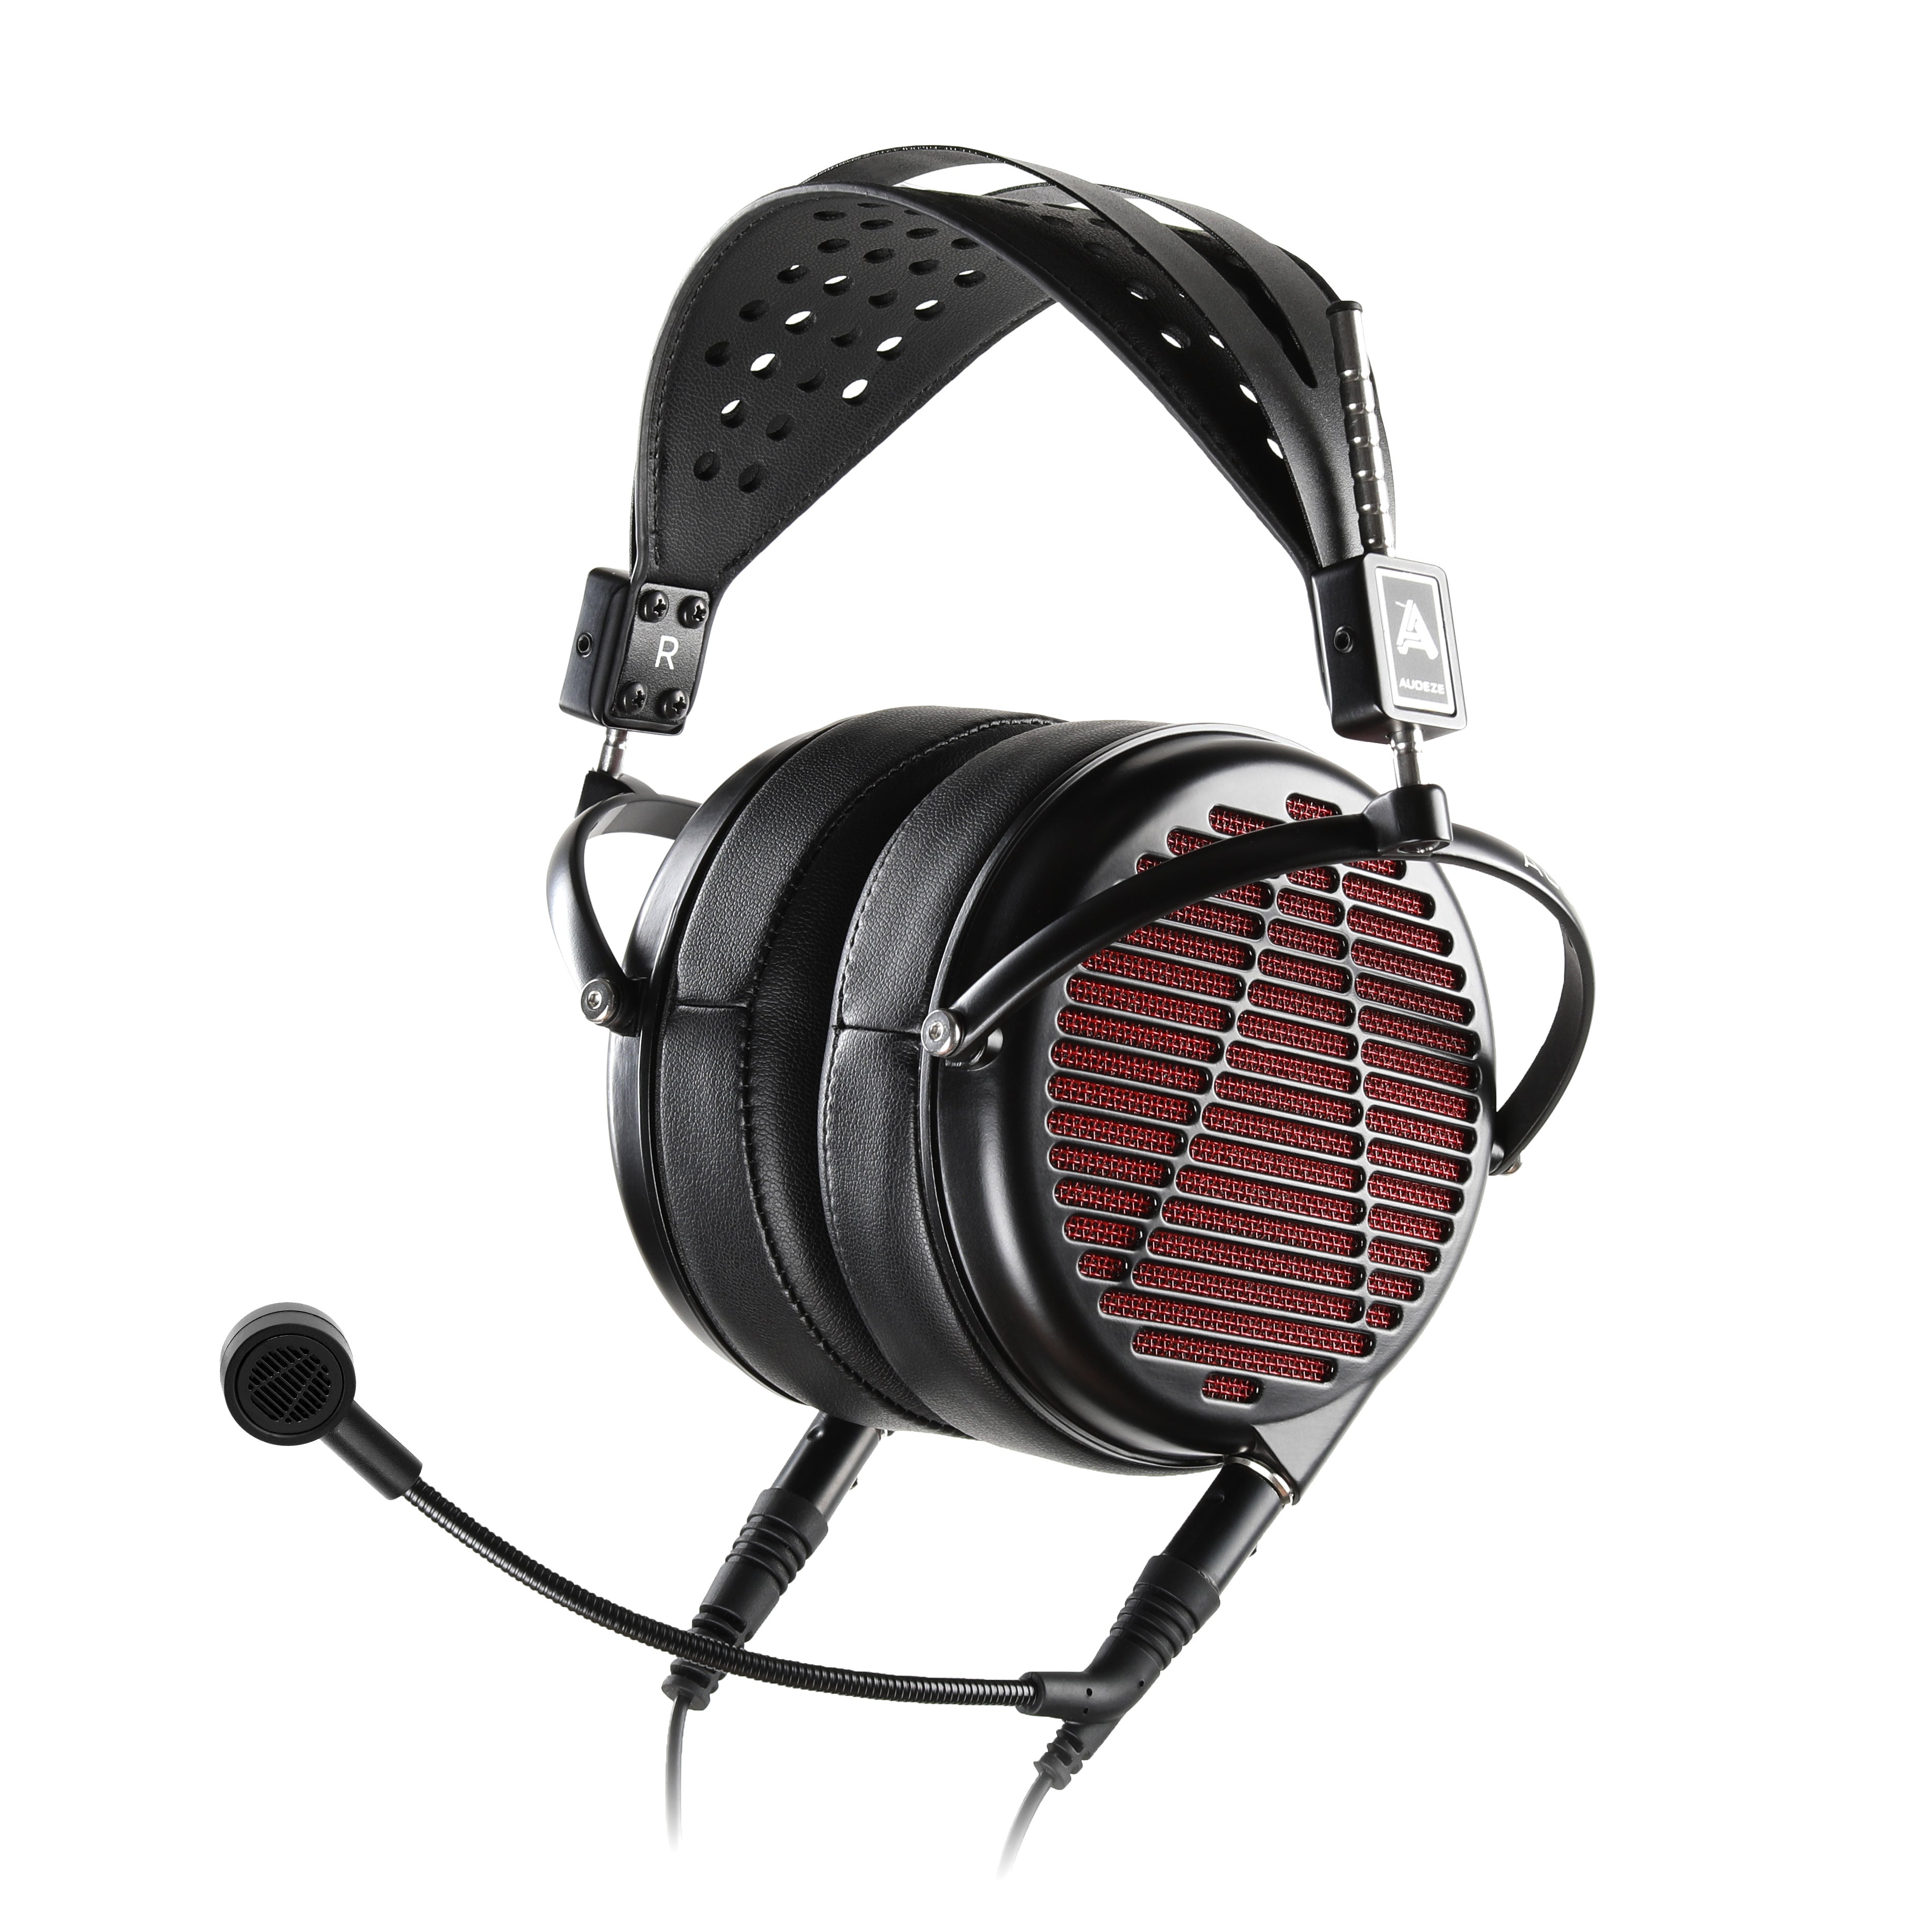 Audeze High-End Gaming Headset, Best for Competitive Gamers - Audeze